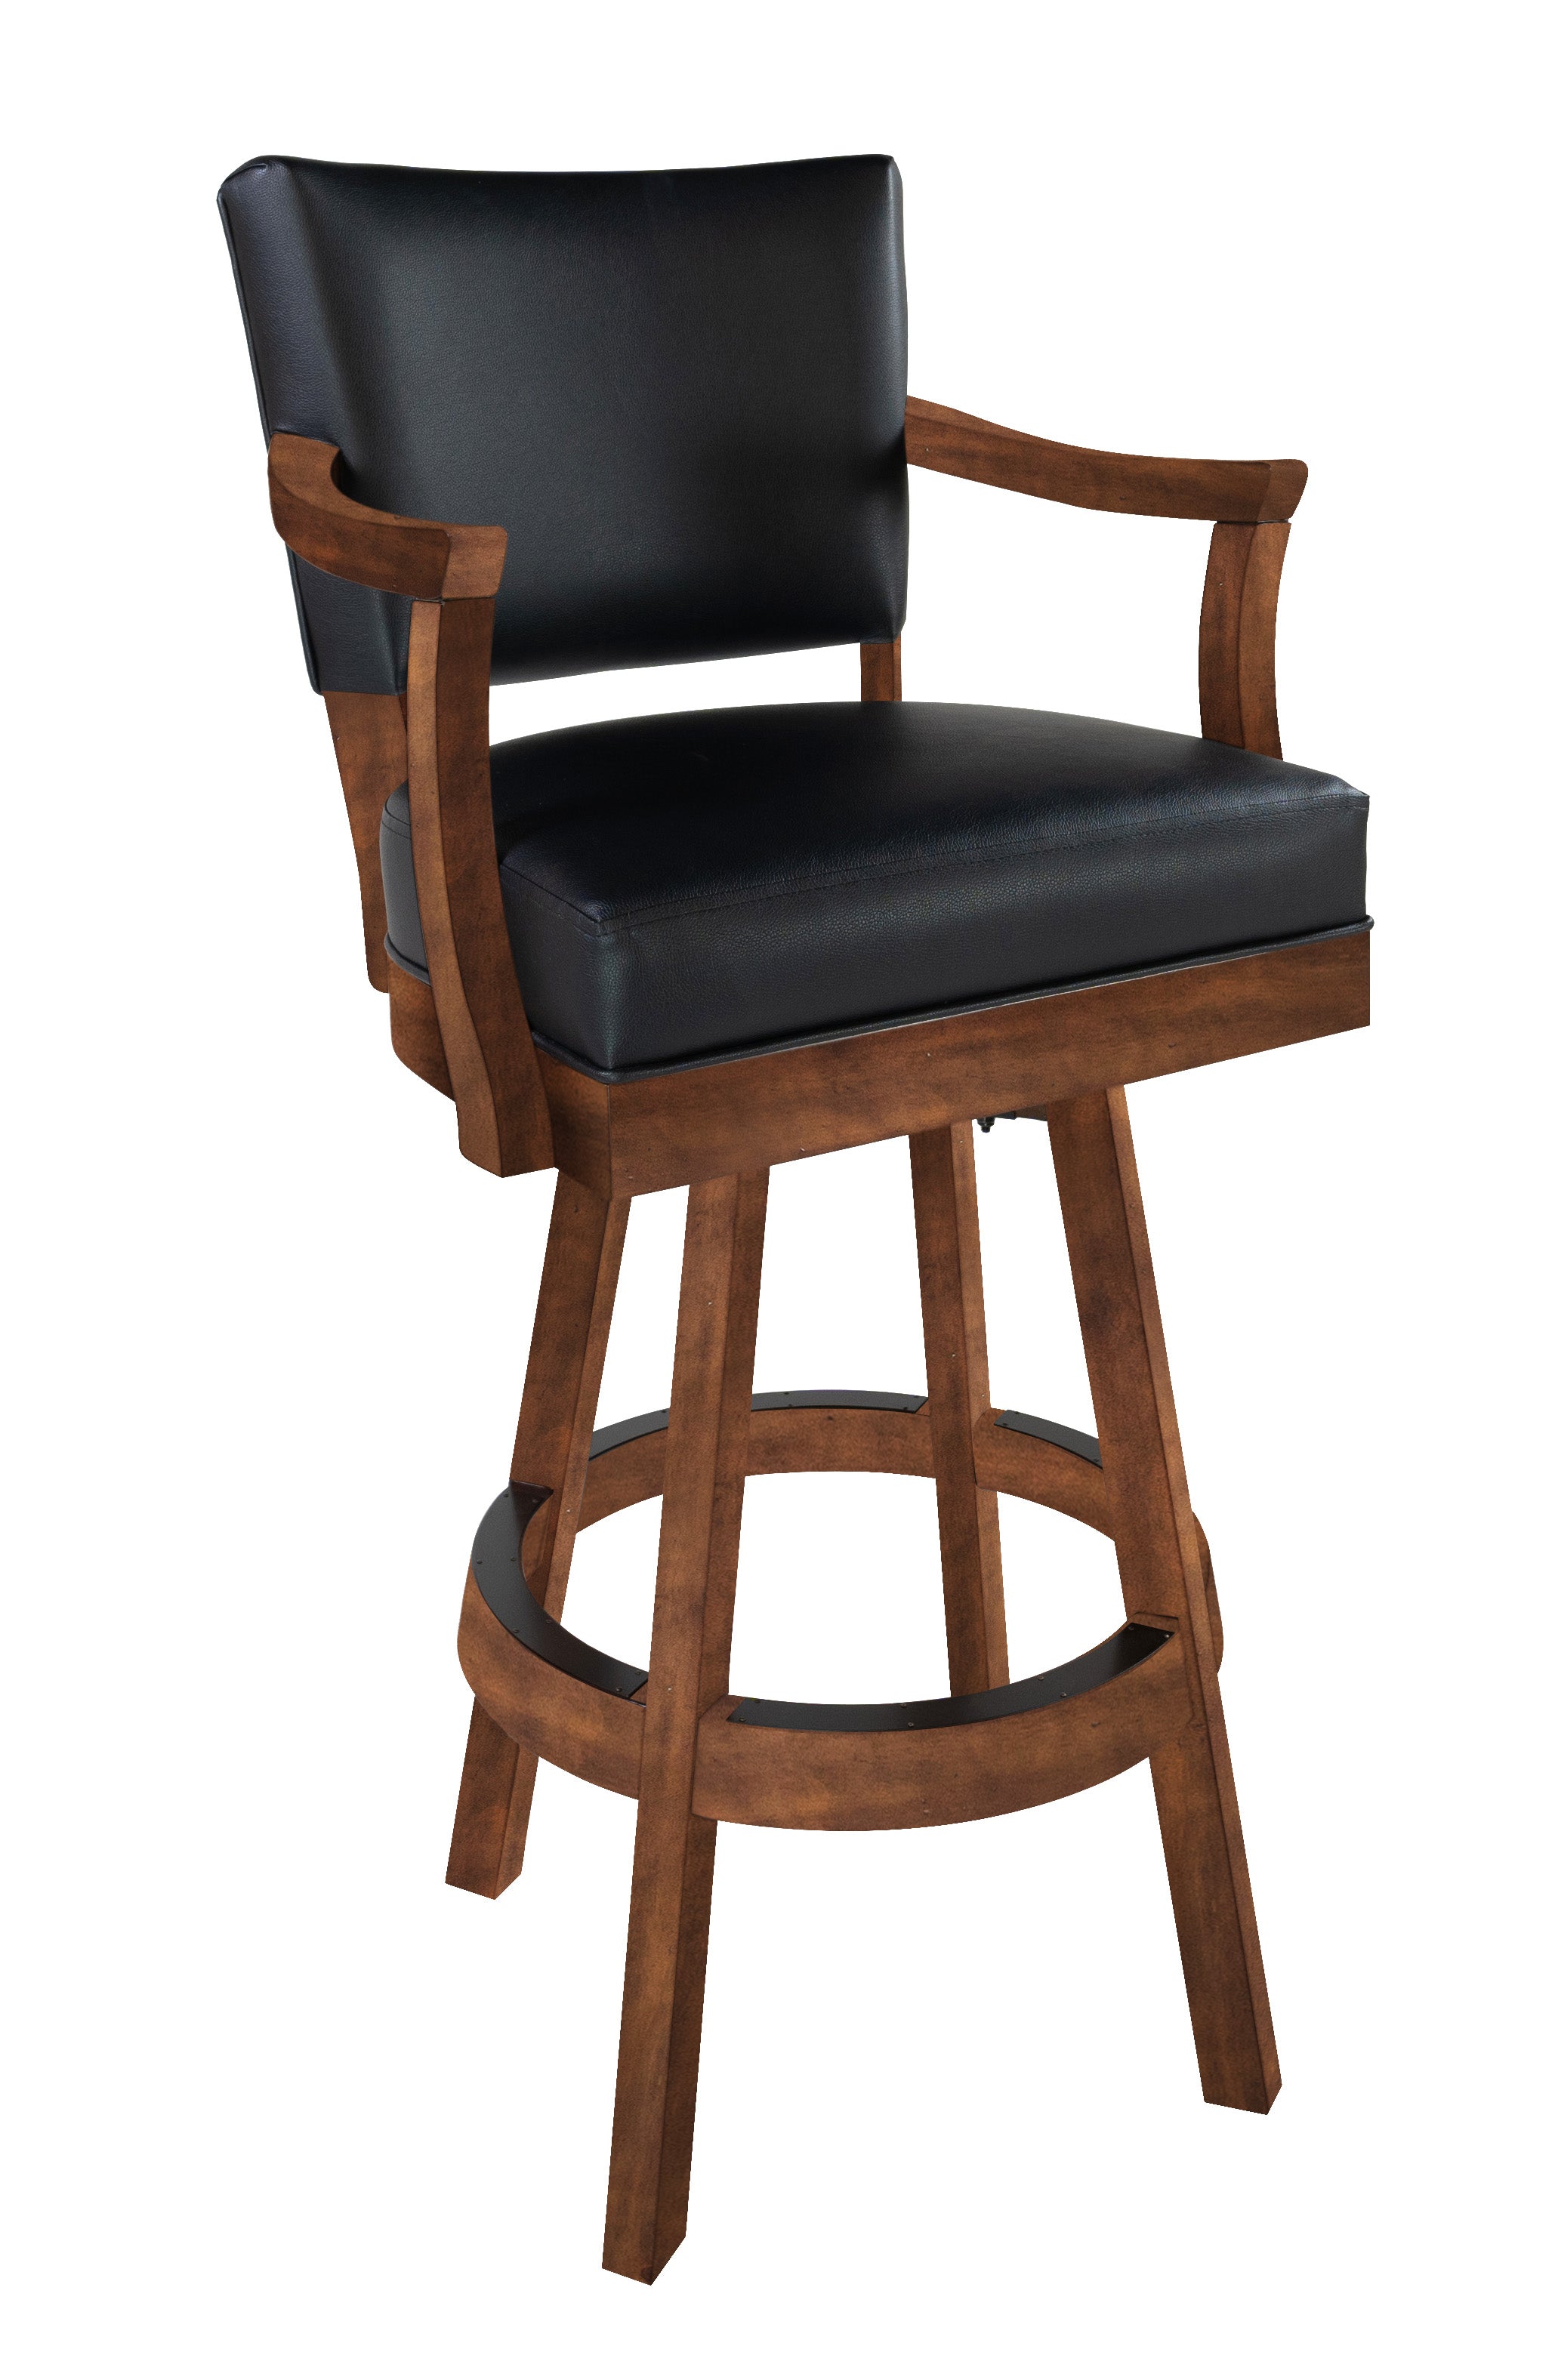 Legacy Billiards Classic Backed Barstool with Arms in Gunshot Finish - Primary Image